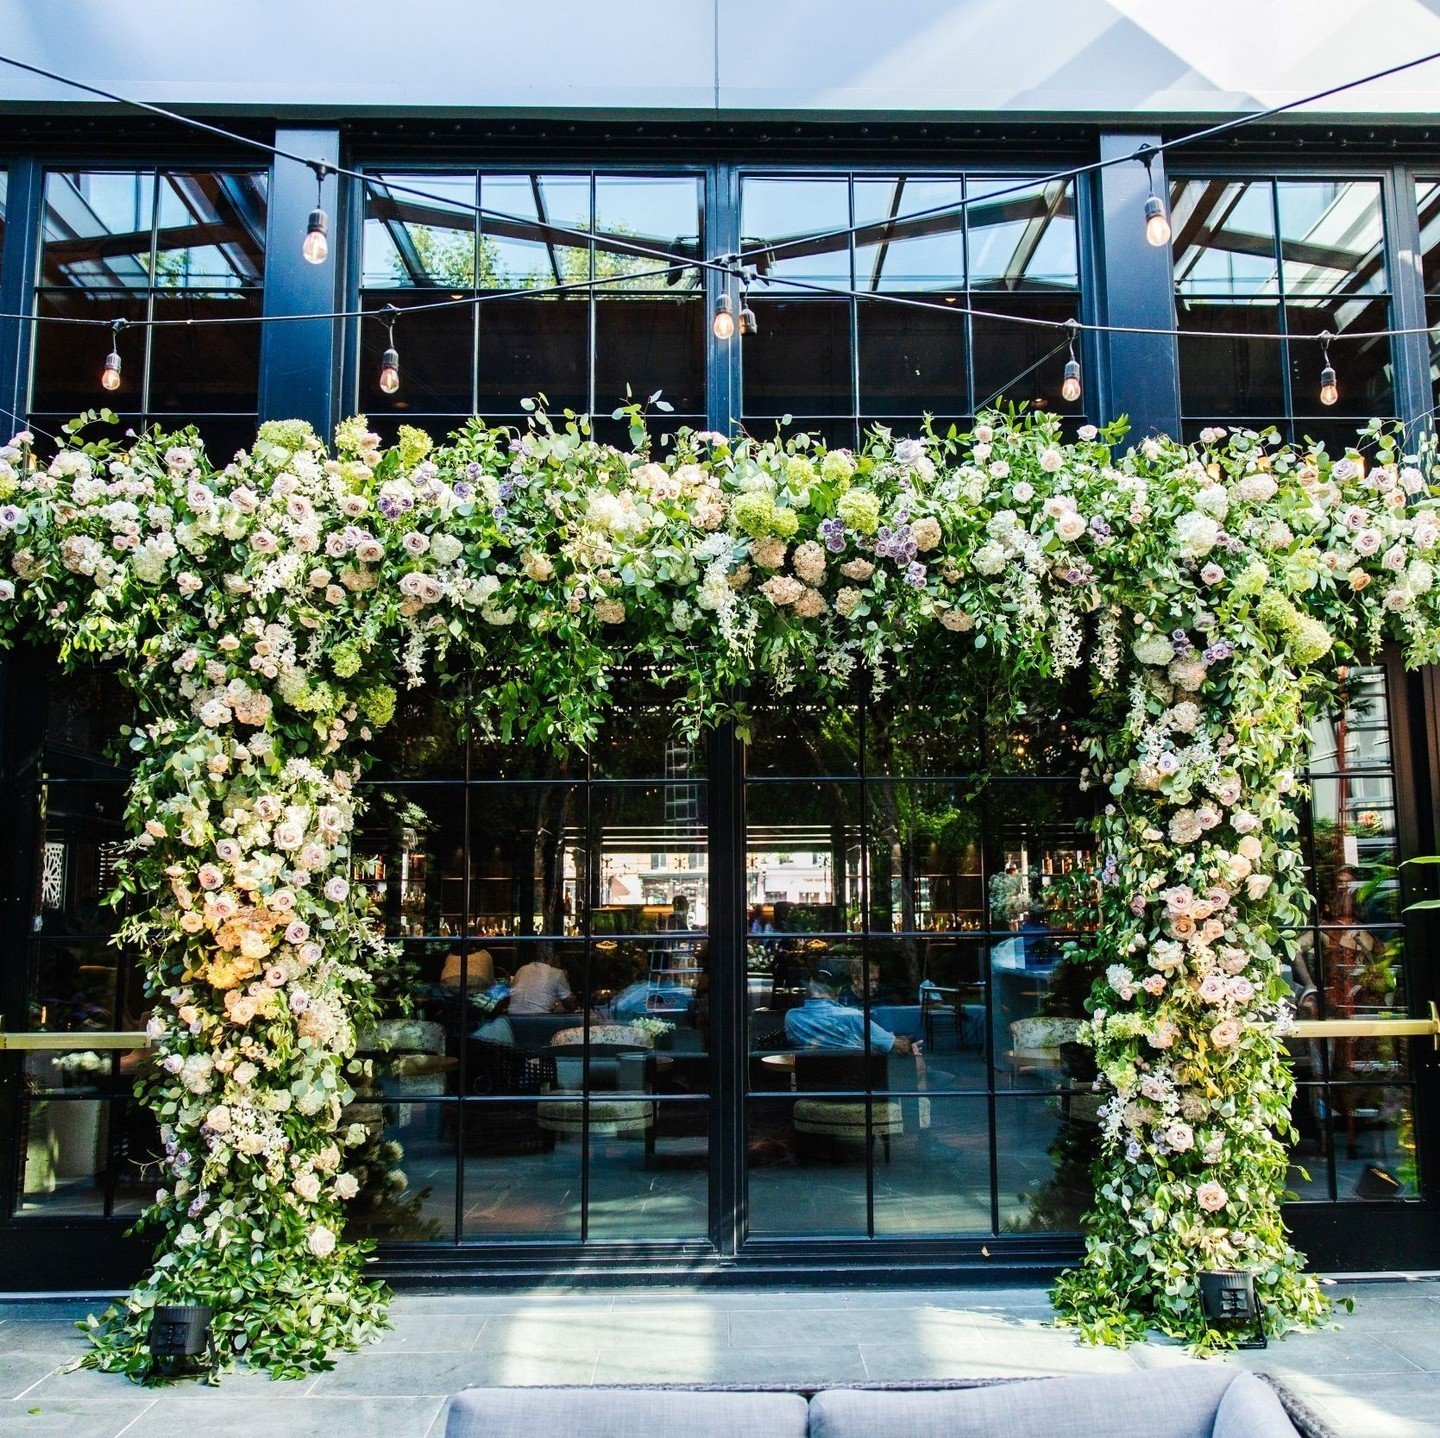 With an entrance like this, guests are sure to know they're in the right place for the party! ⁠If humans remember anything, it's how something made them feel. Why not create a reason for them to get butterflies and a wave of amusement to carry throug